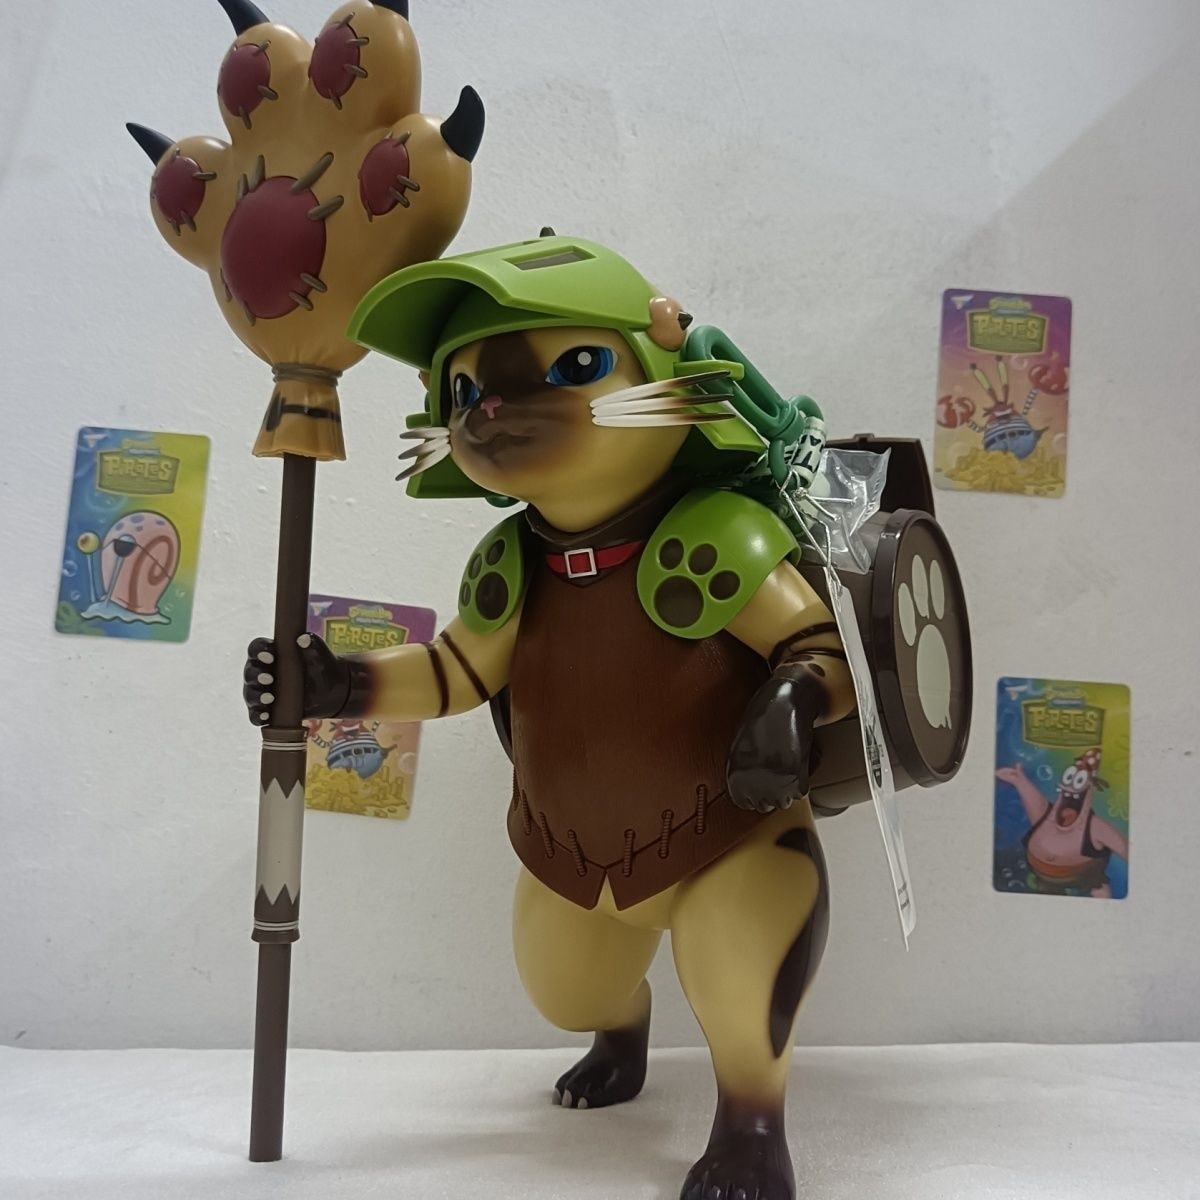 In Stock Monster Hunter Figure Toy Game Anime Ellione Cat Action Figure Universal Studios Figurine Collectible - Monster Hunter Plush